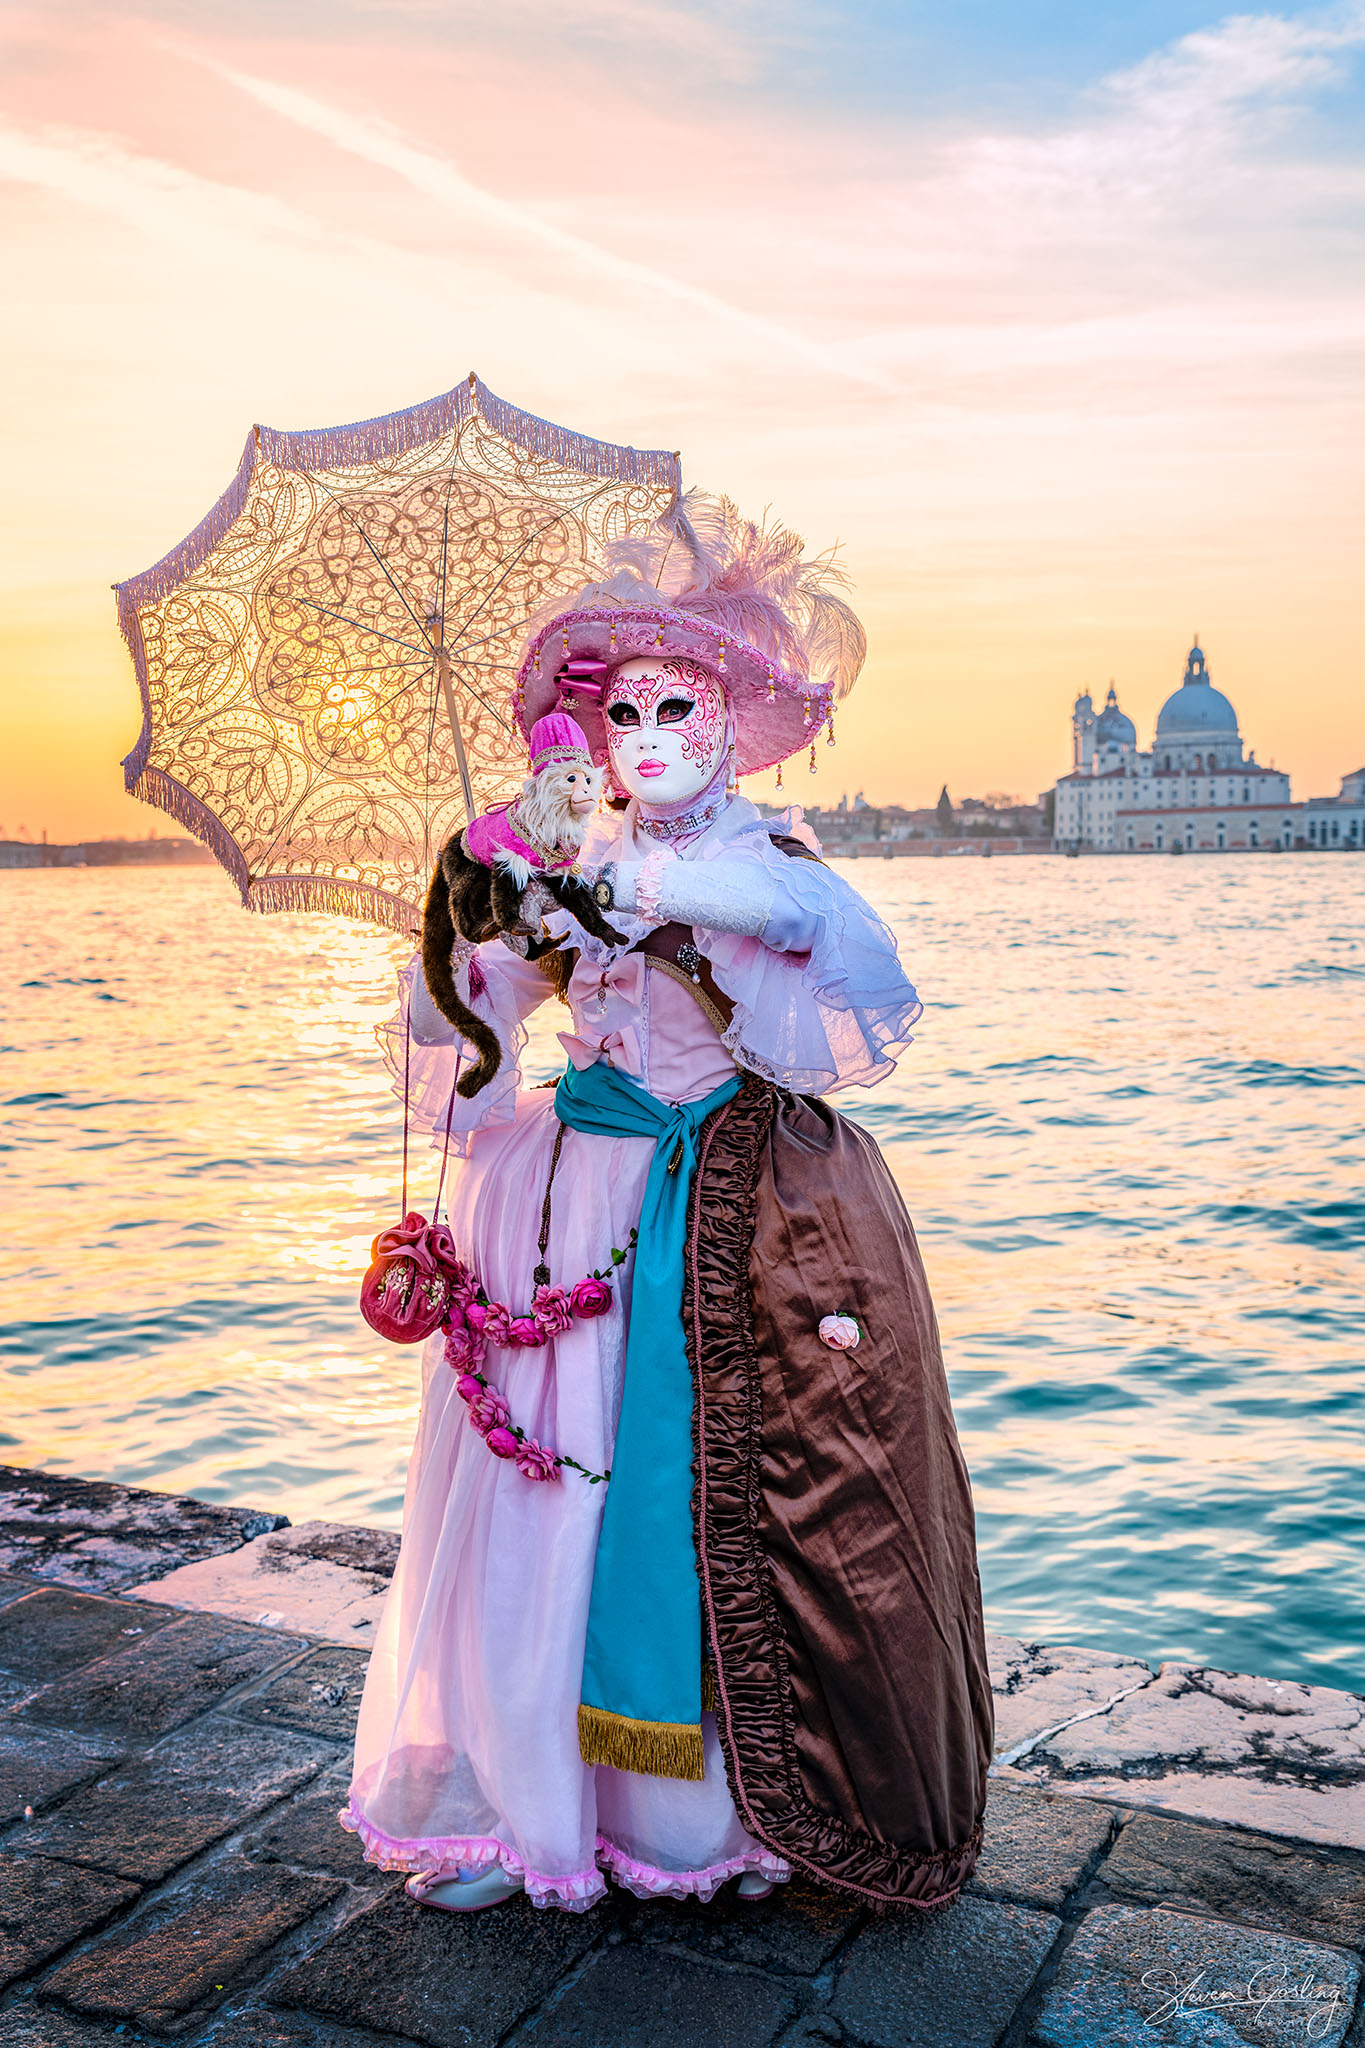 Ballet & Ball Gowns Photography Workshop at the Venice Carnival 157